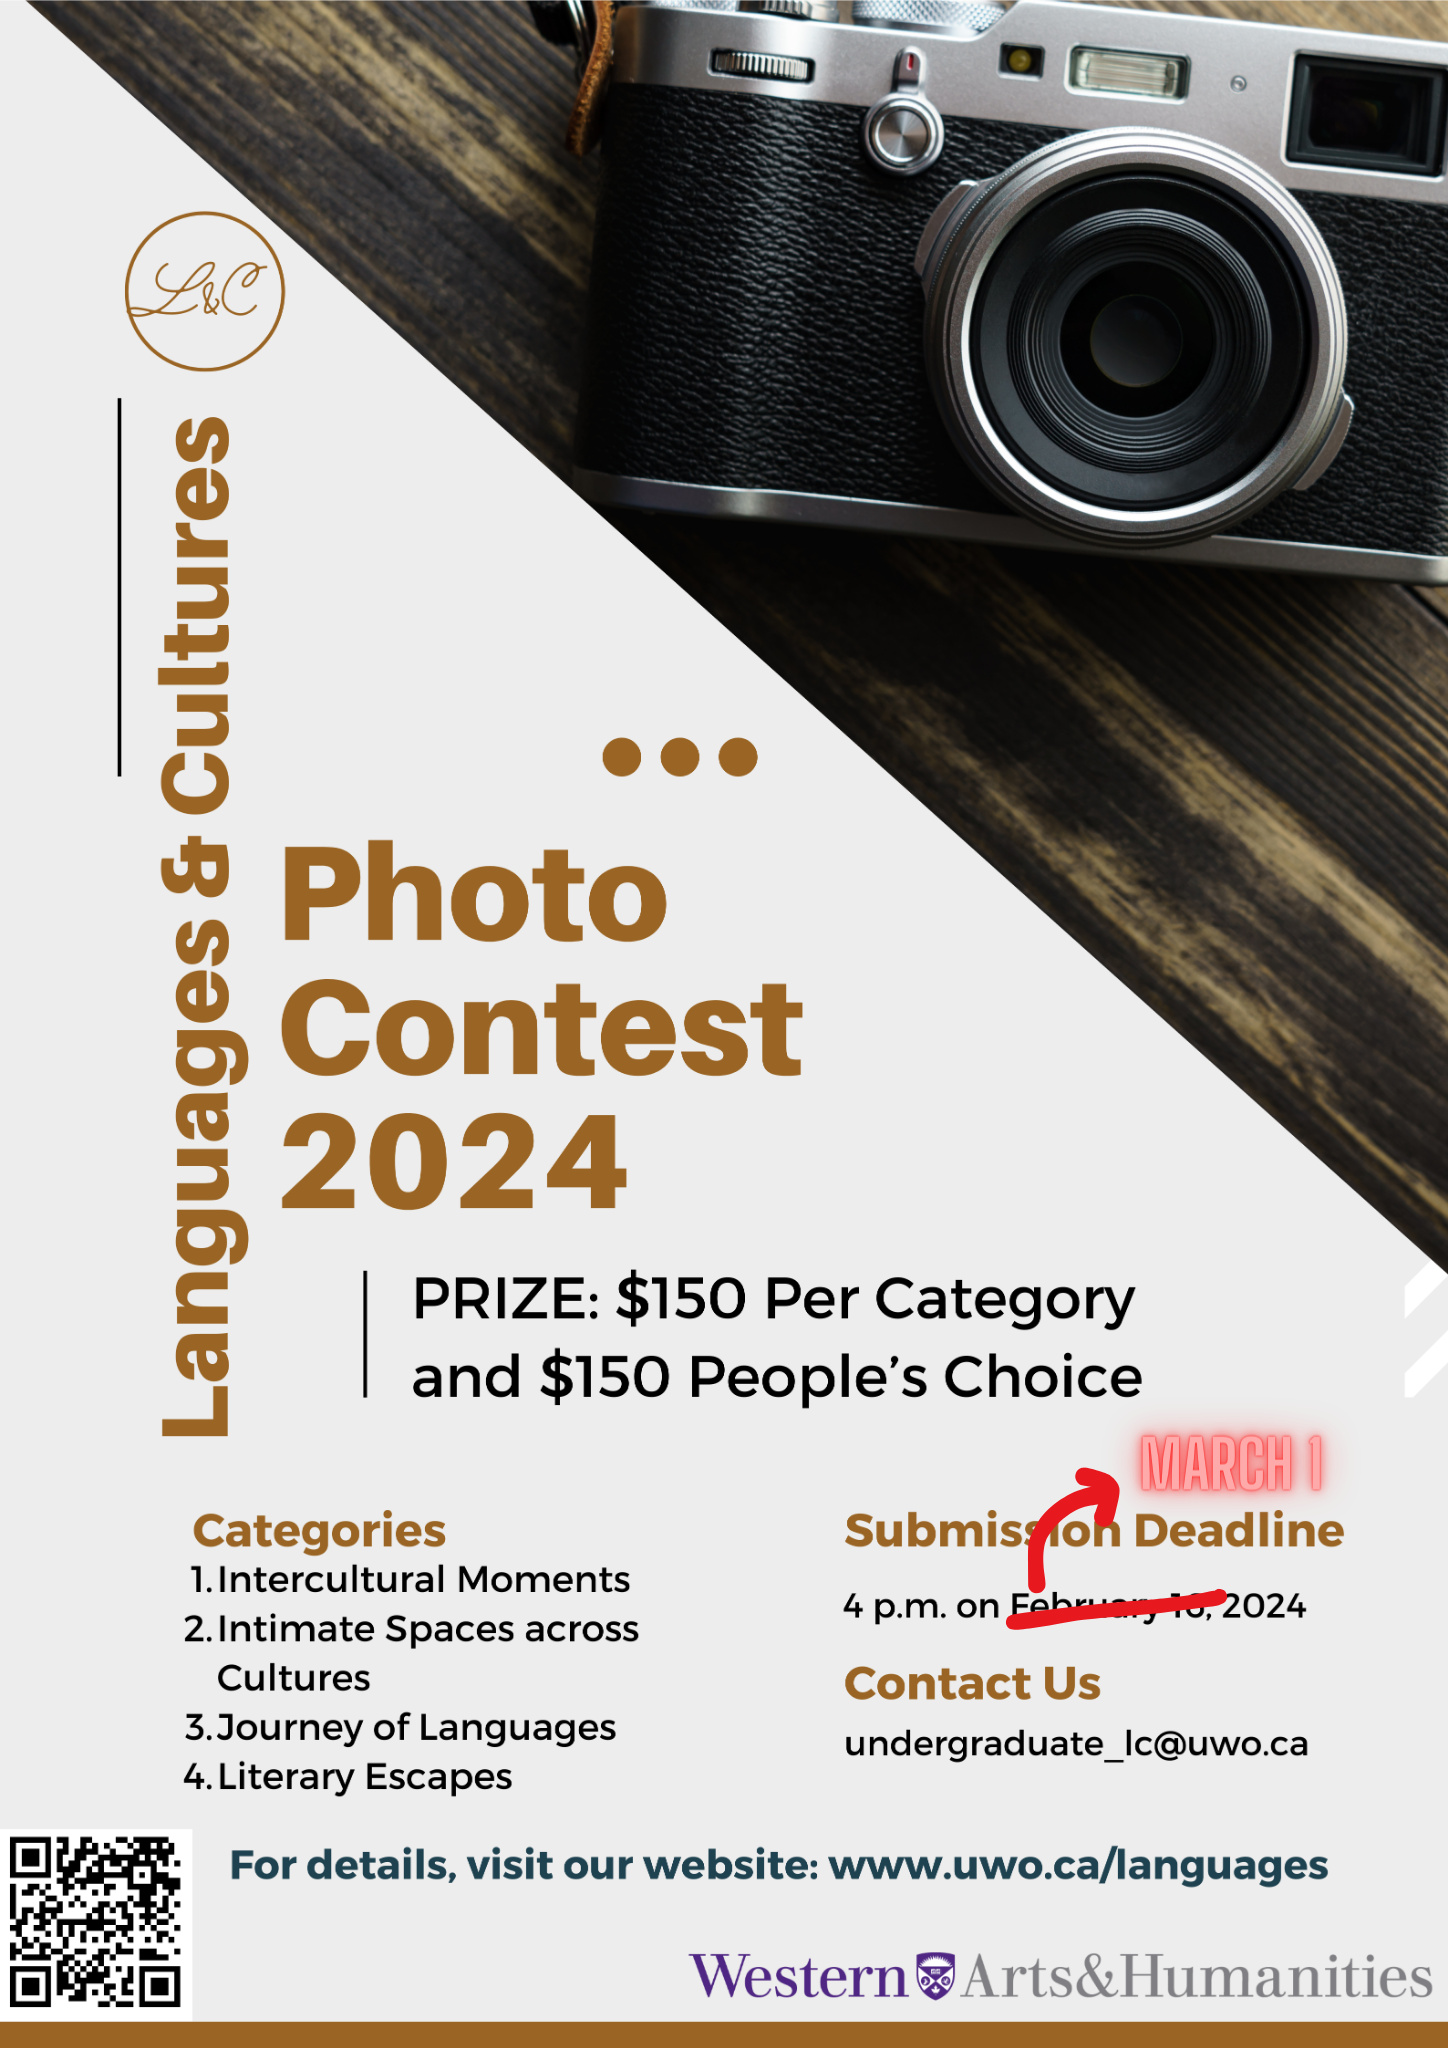 March-1-photo-contest.png